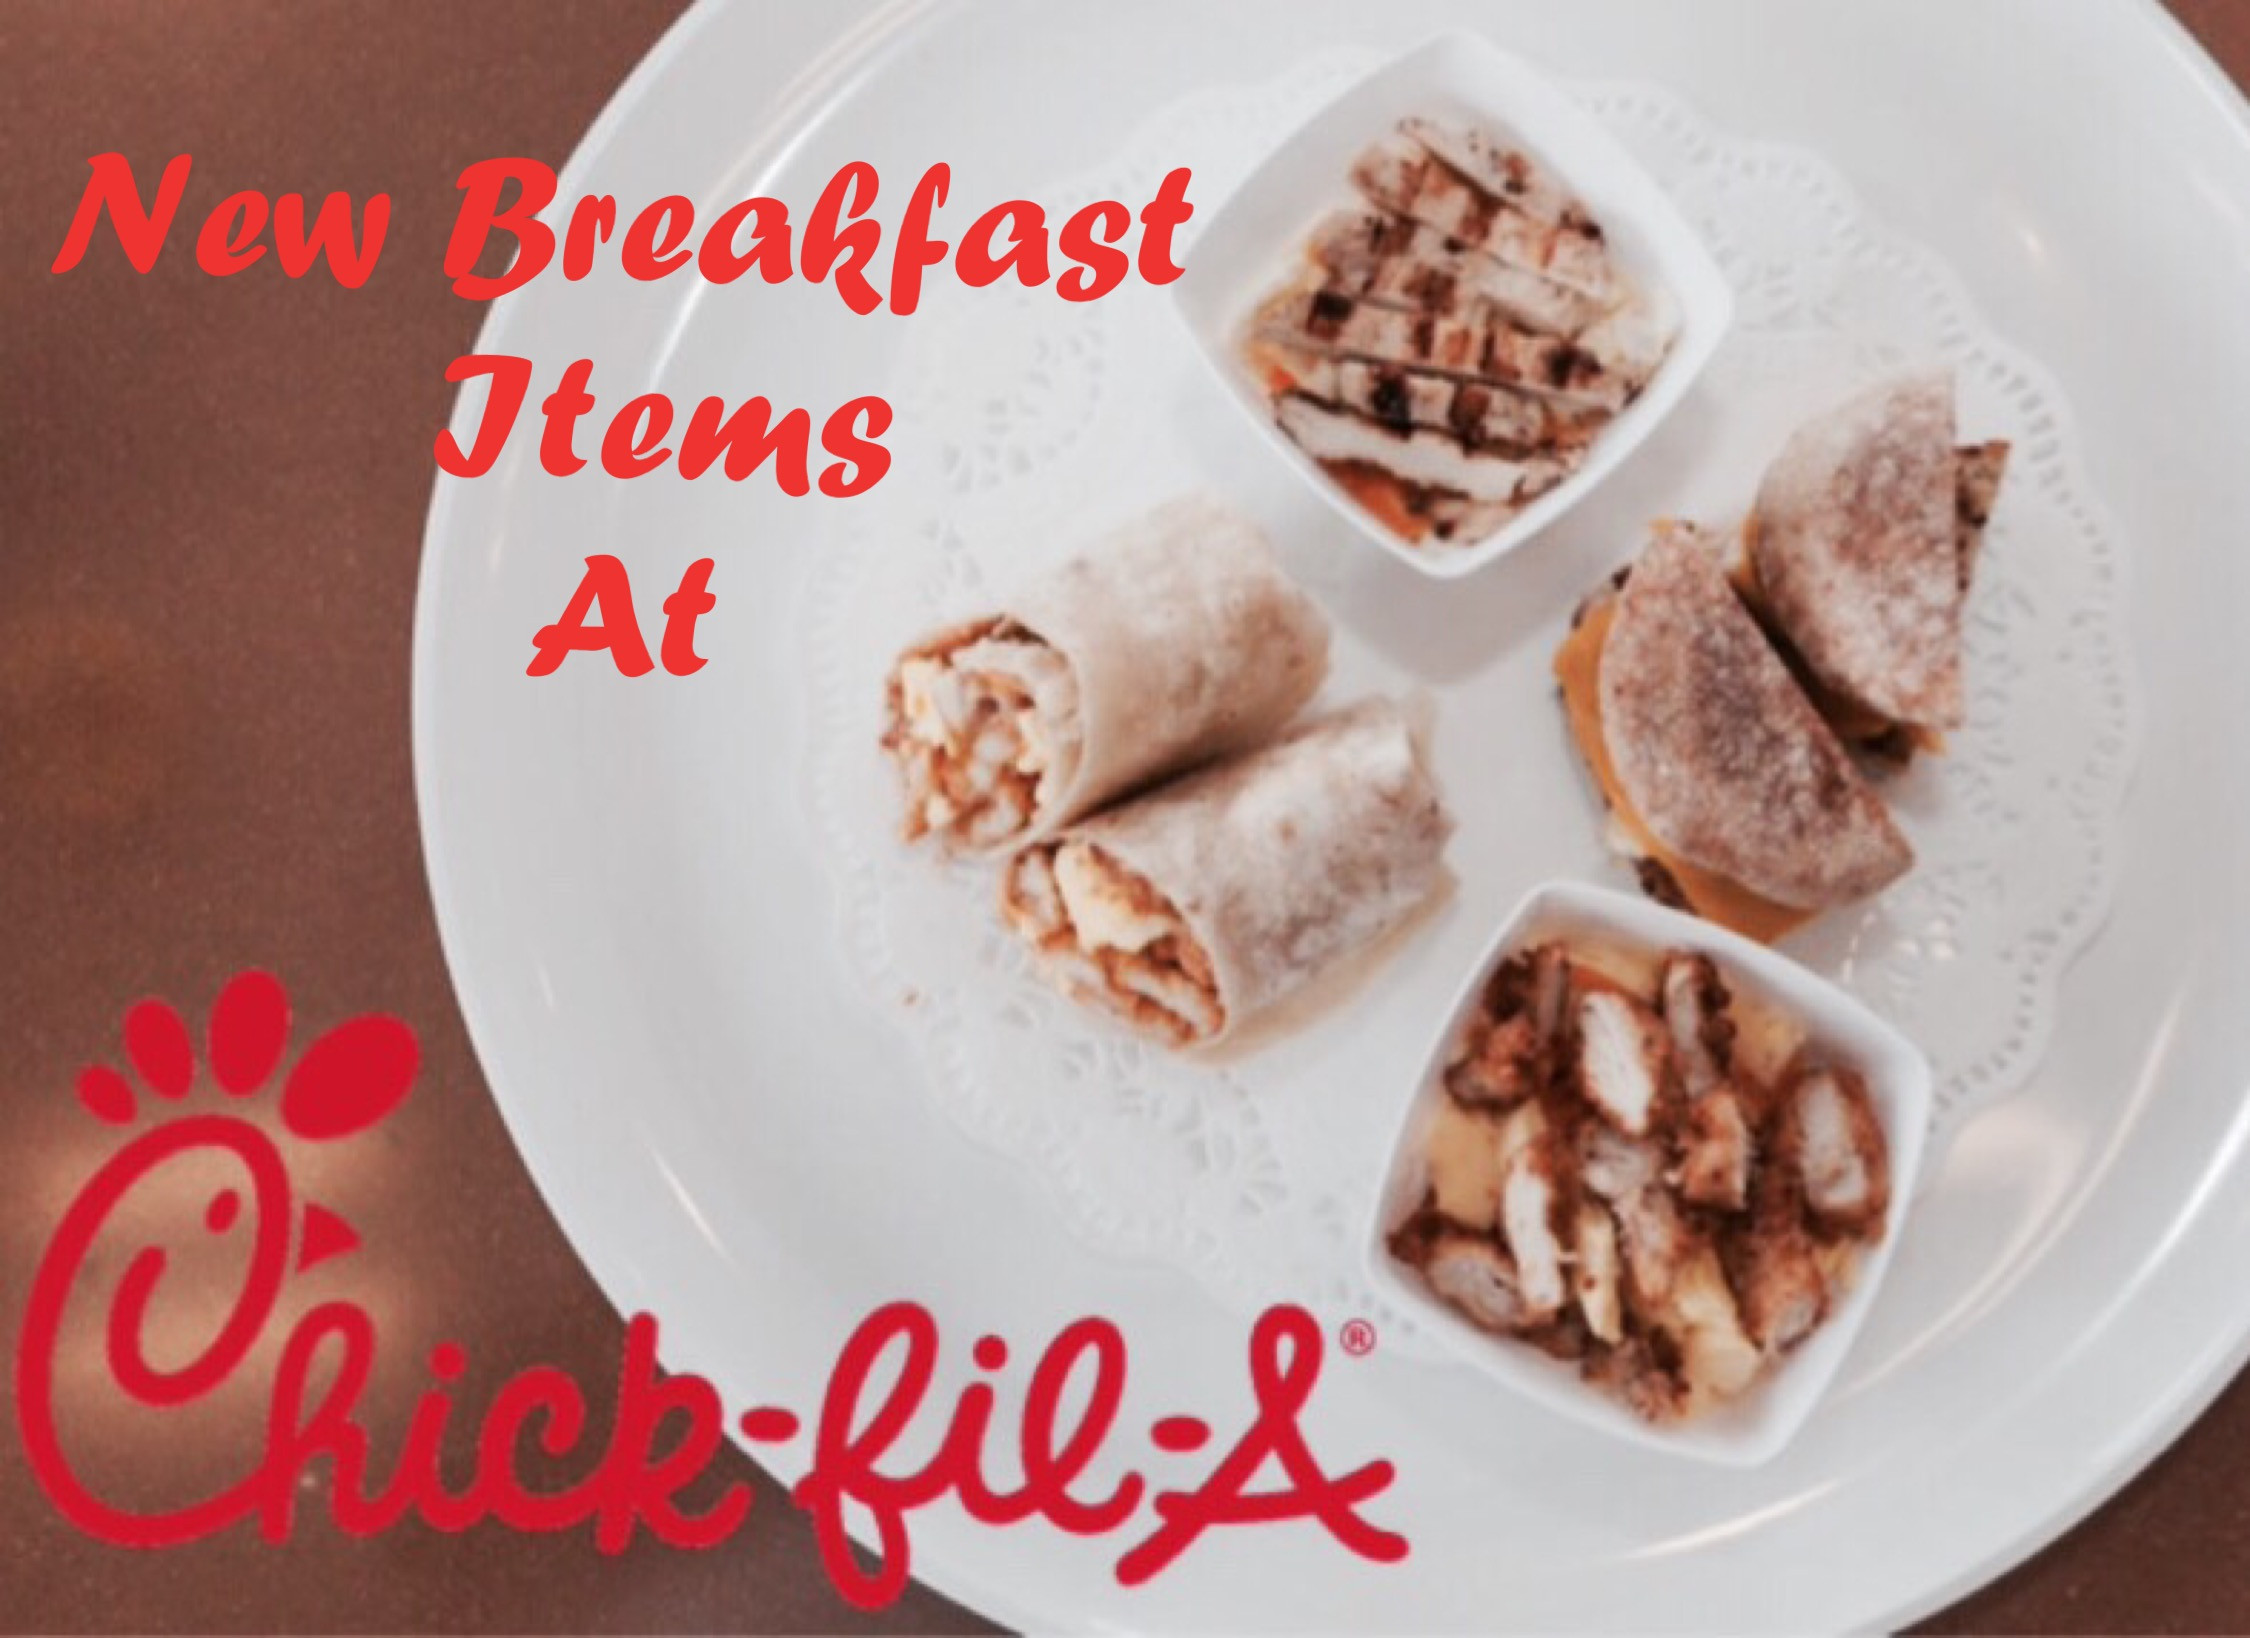 Chick Fil A Healthy Breakfast
 New Breakfast Items At Chick fil A Mom the Magnificent